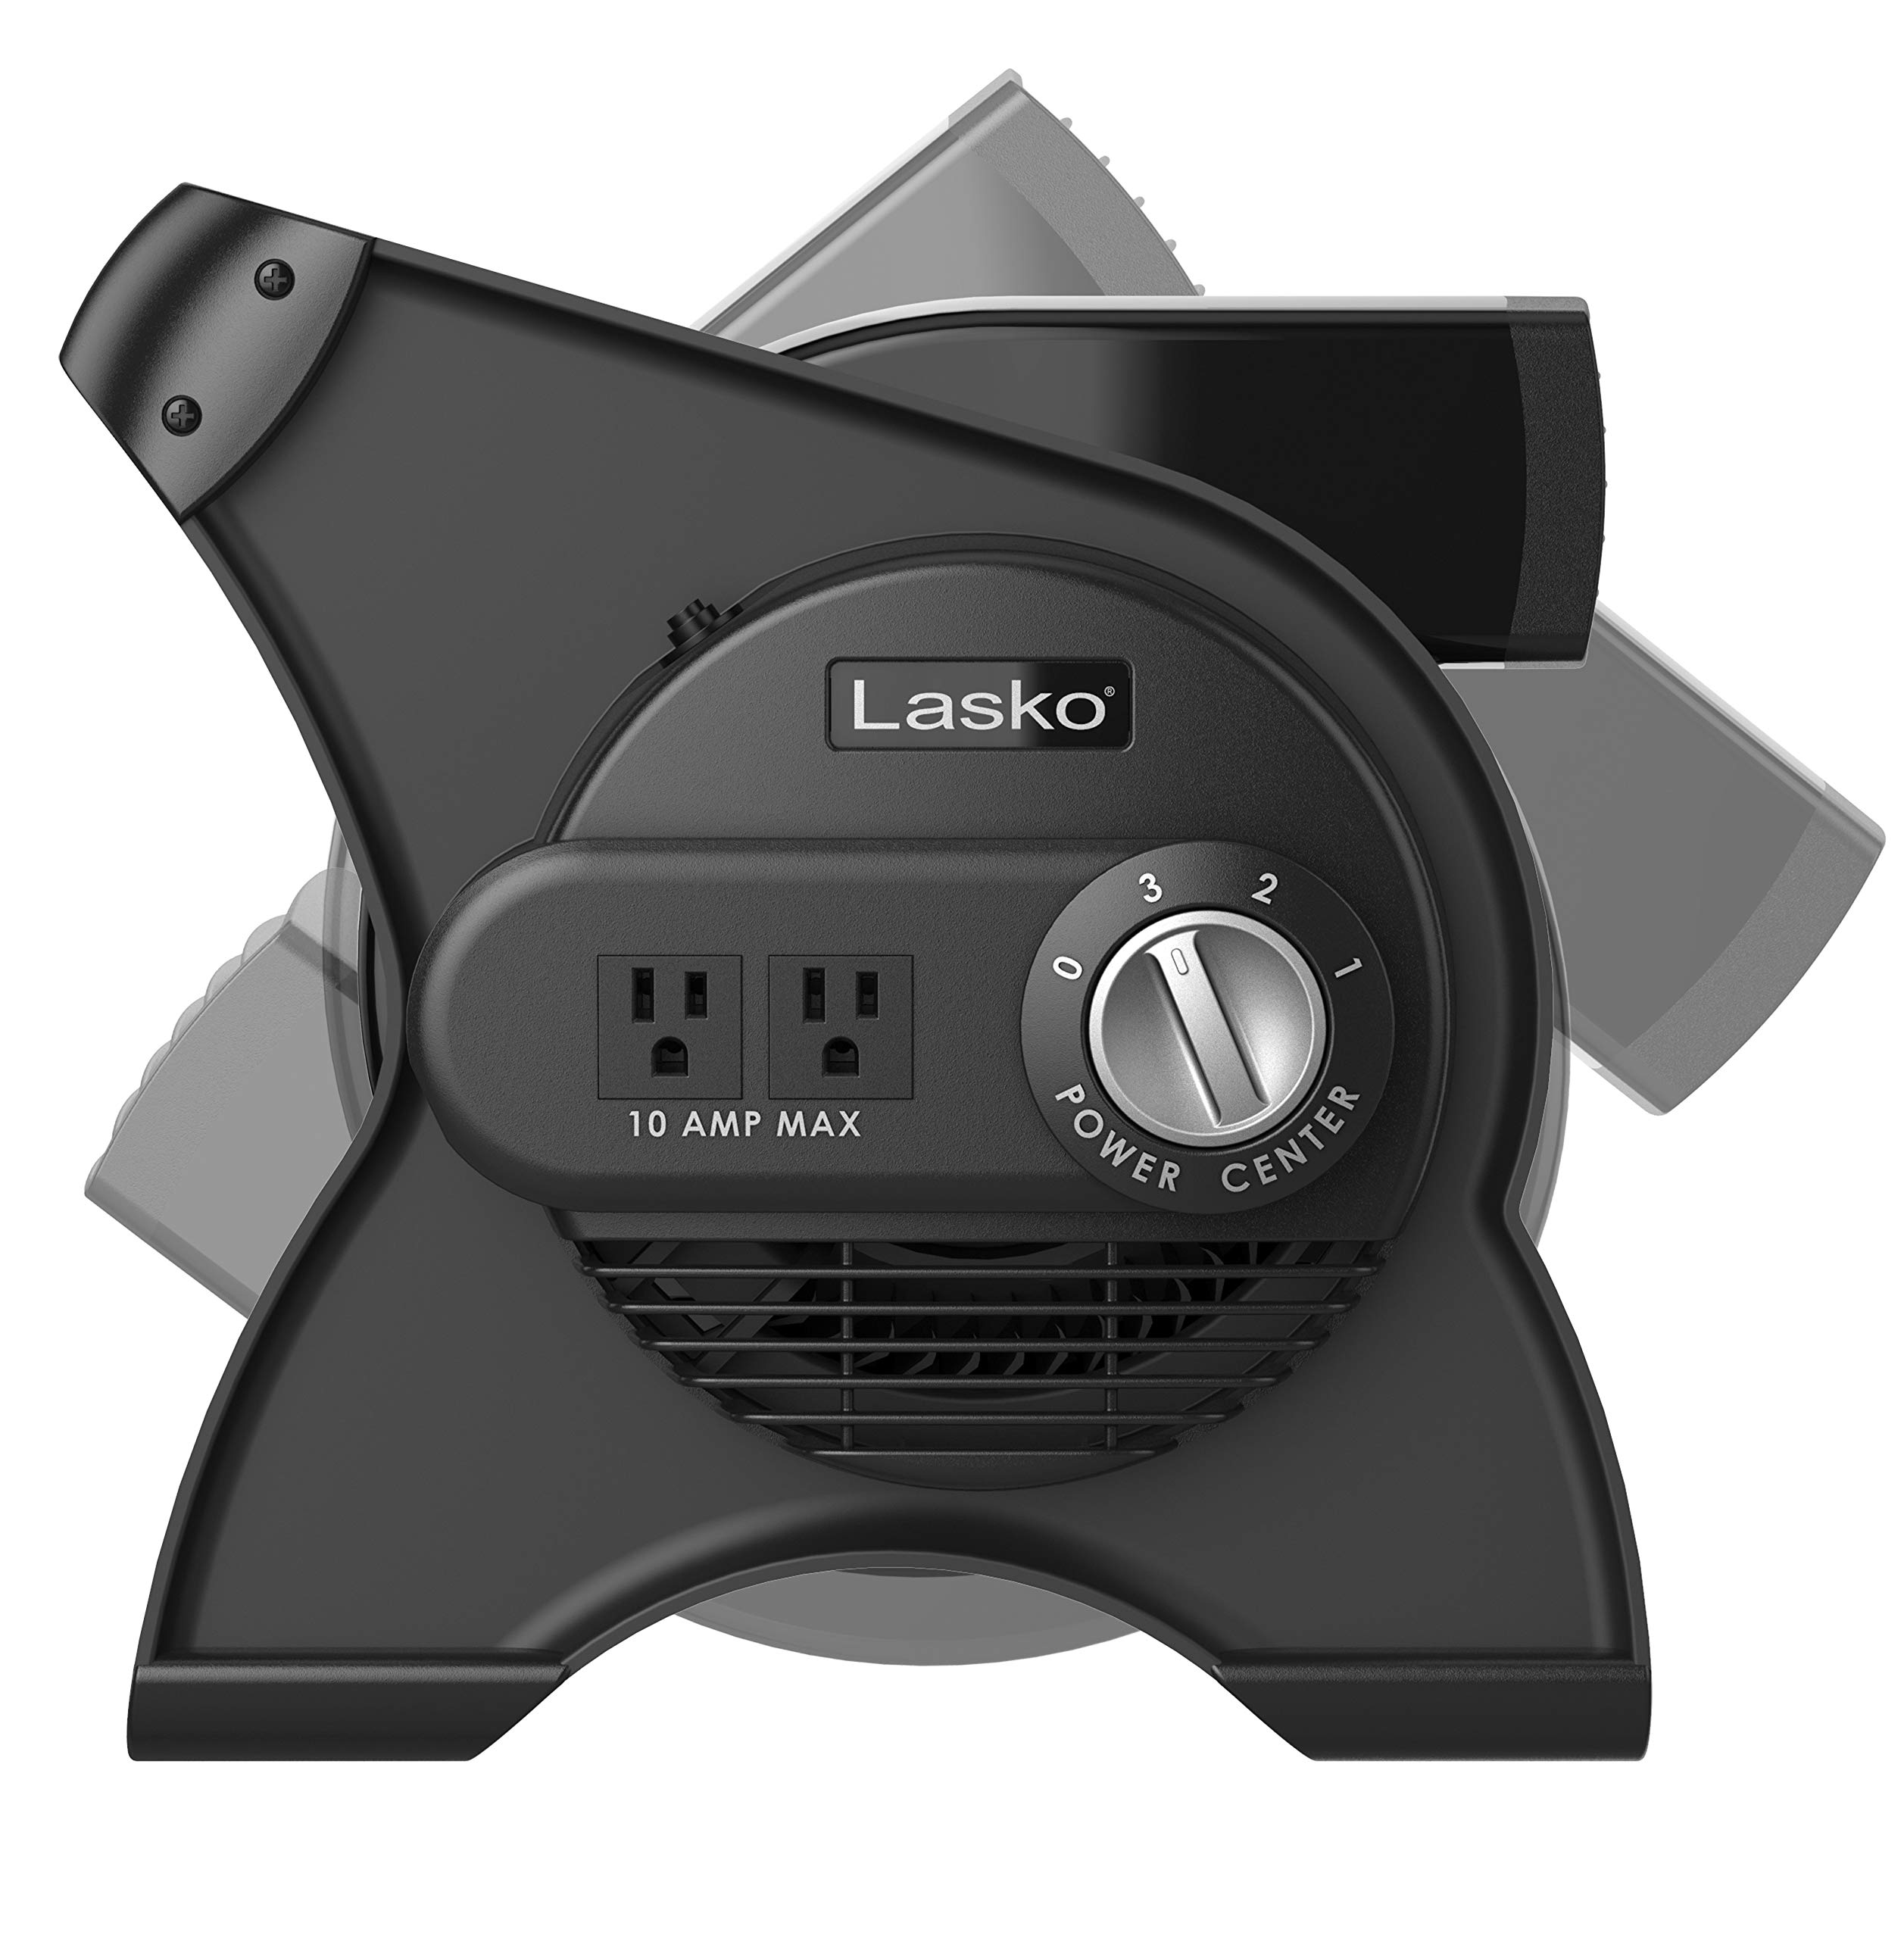 Lasko High Velocity Pivoting Utility Blower Fan, for Cooling, Ventilating, Exhausting and Drying at Home, Job Site, Construction, 2 AC Outlets, Circuit Breaker with Reset, 3 Speeds, 12